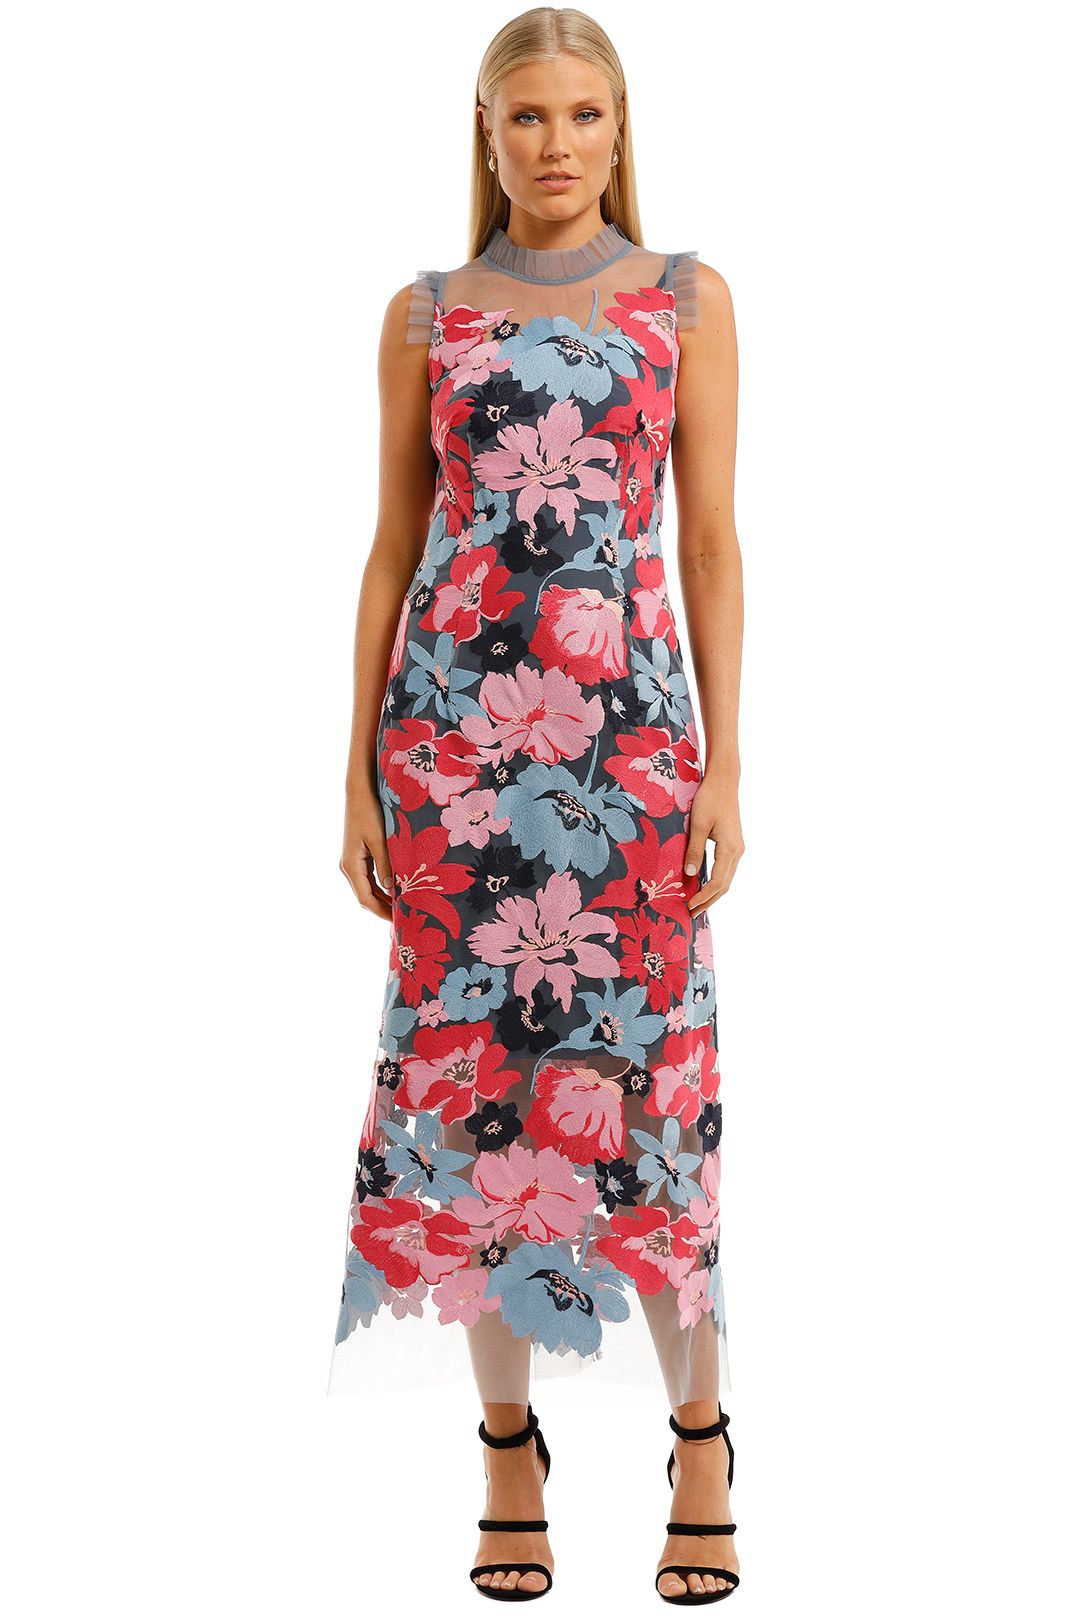 Bianca Dress in Floral by Moss and Spy for Hire | GlamCorner